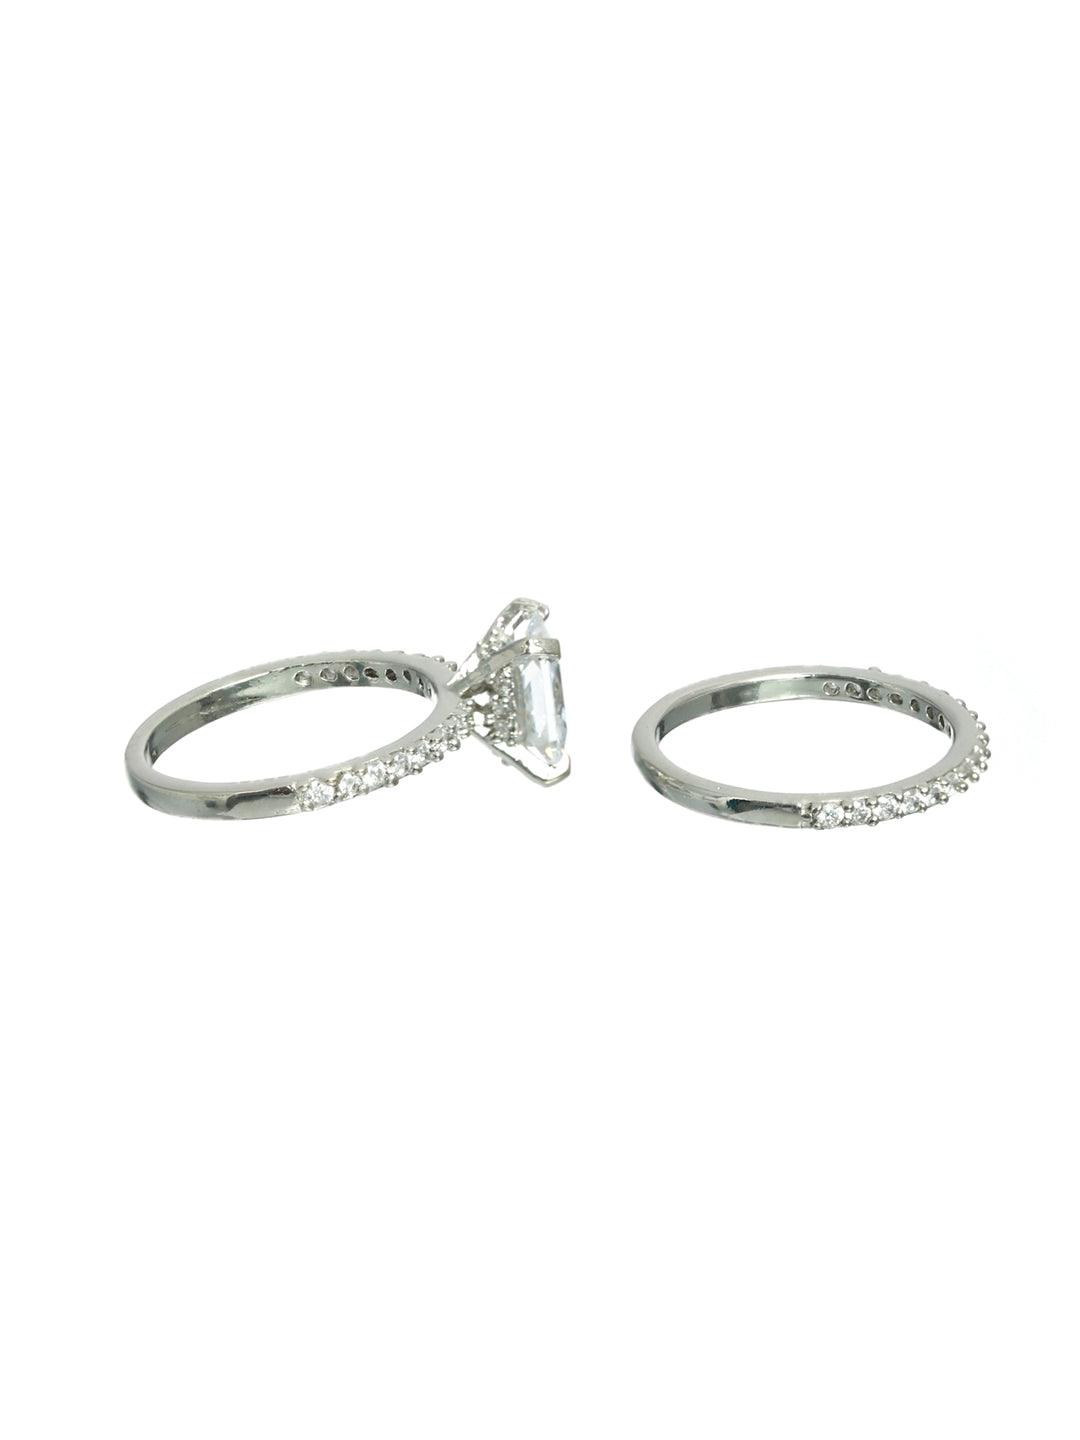 Women's Silver Plated CZ studded Solitaire Stack Rings - Jazz and Sizzle - Indiakreations